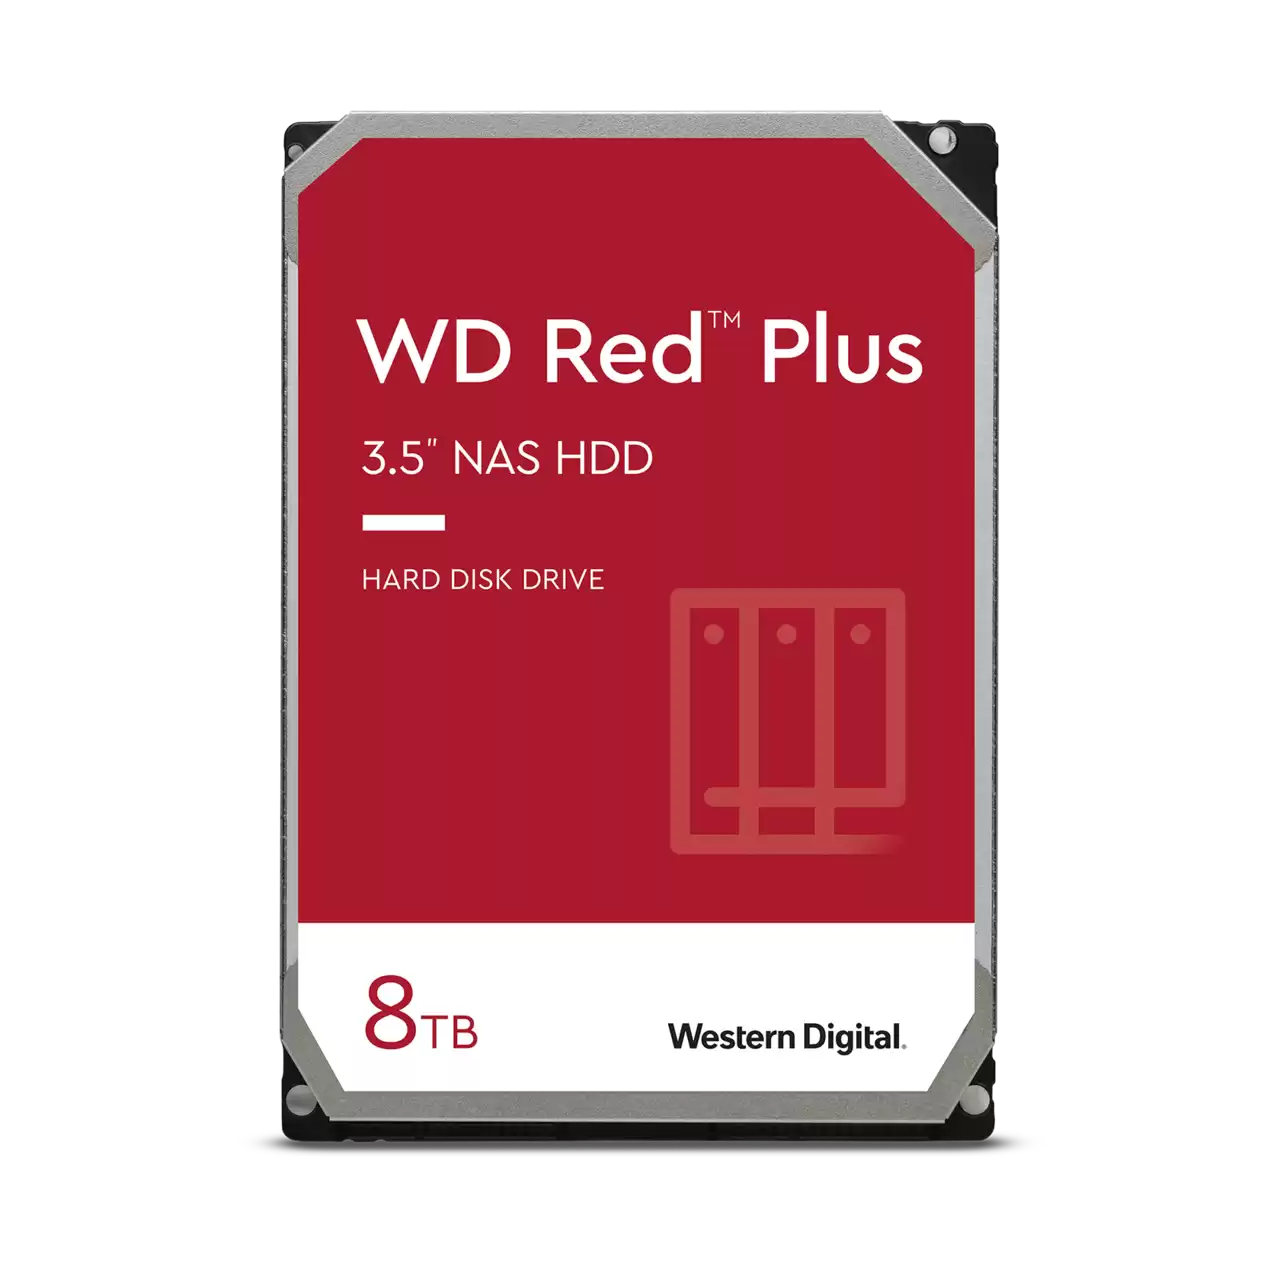 HDD Hard Disk WD Red Plus 8TB 3.5" NAS